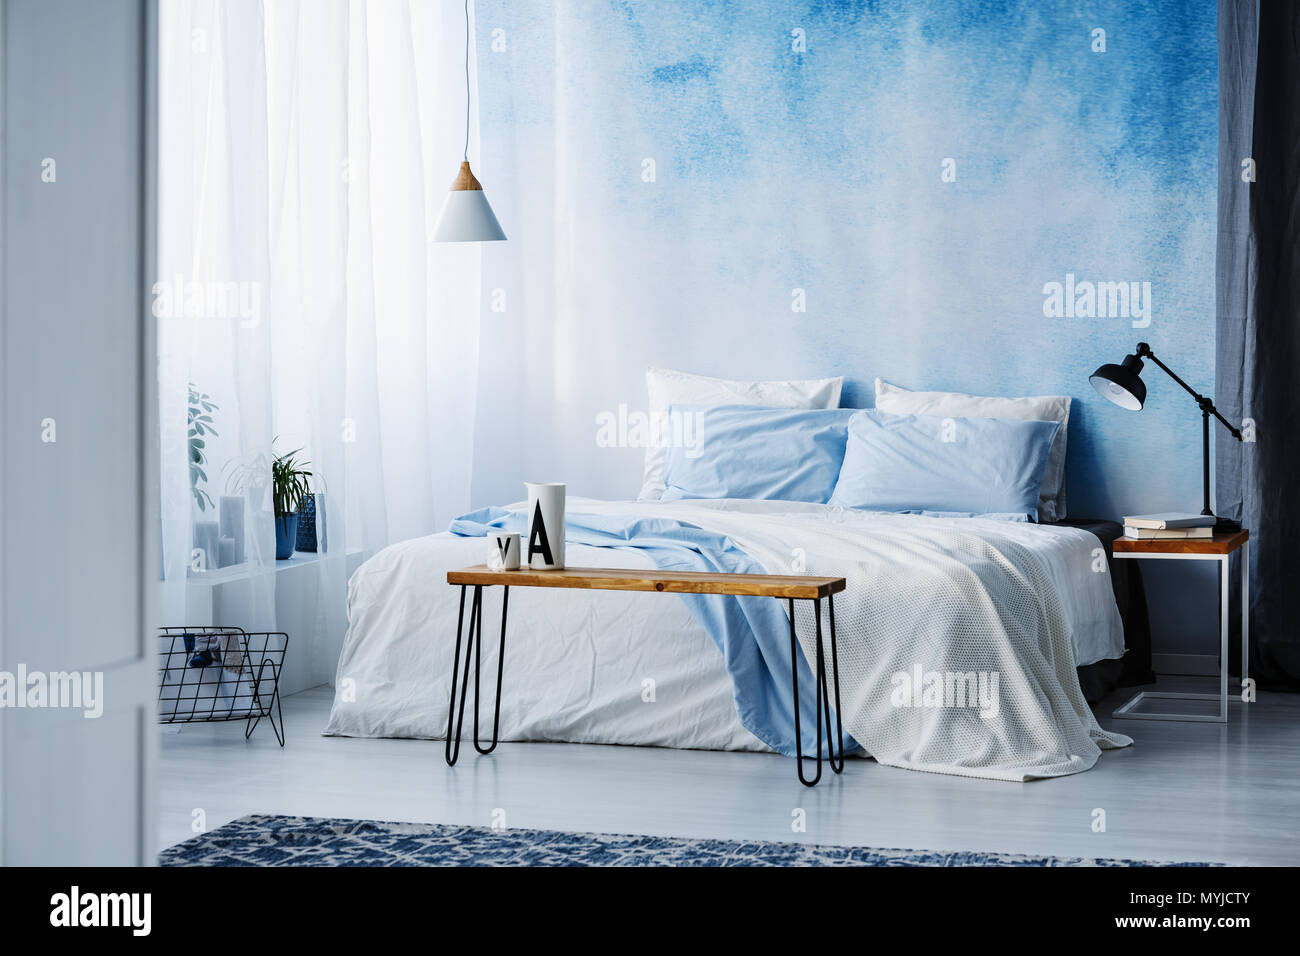 Lamp on wooden table next to a blue and white bed in bedroom interior with ombre wall Stock Photo